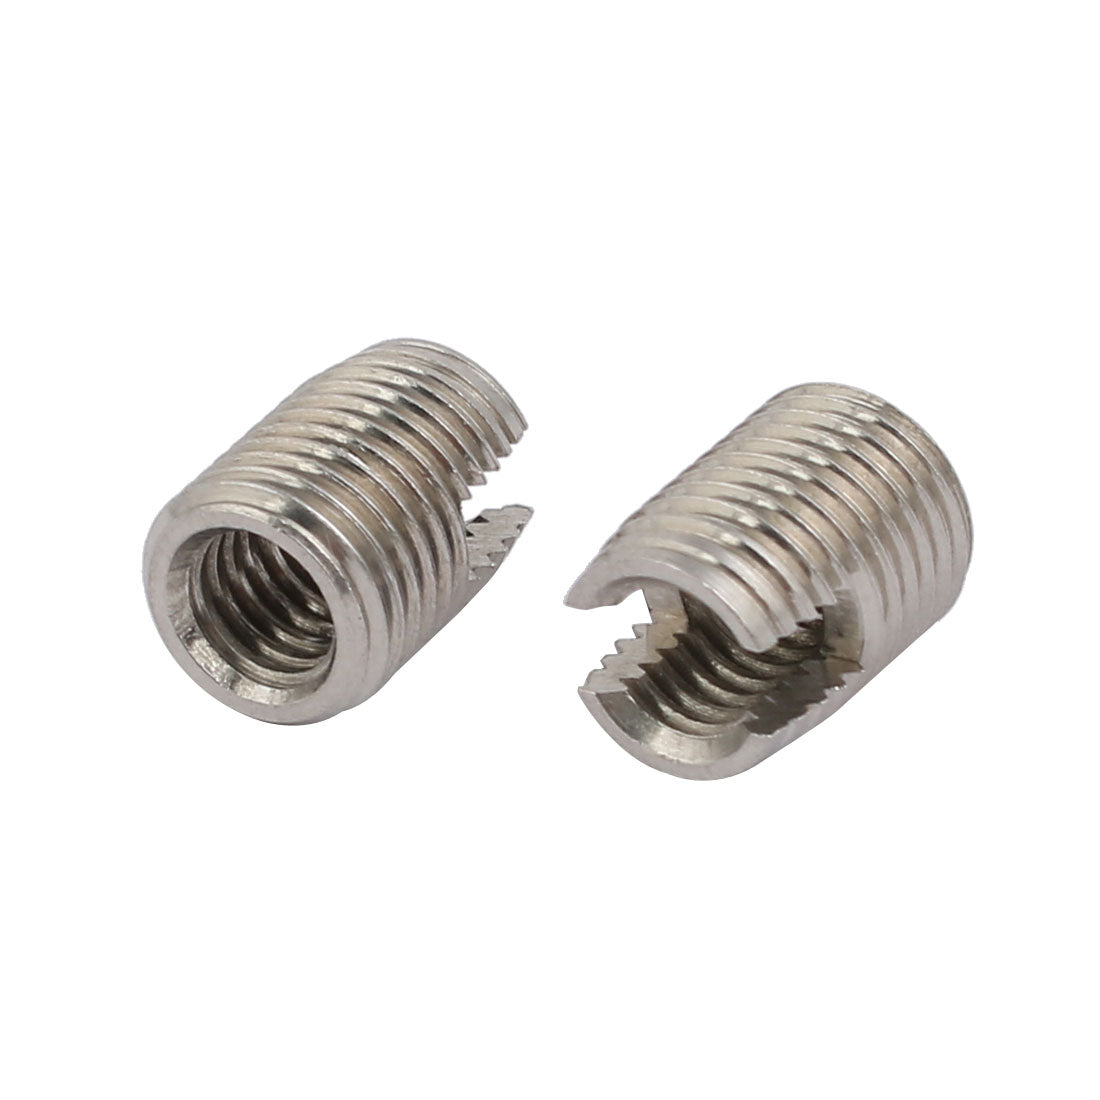 uxcell Uxcell M6x12mm 304 Stainless Steel Self Tapping Slotted Thread Insert 20pcs